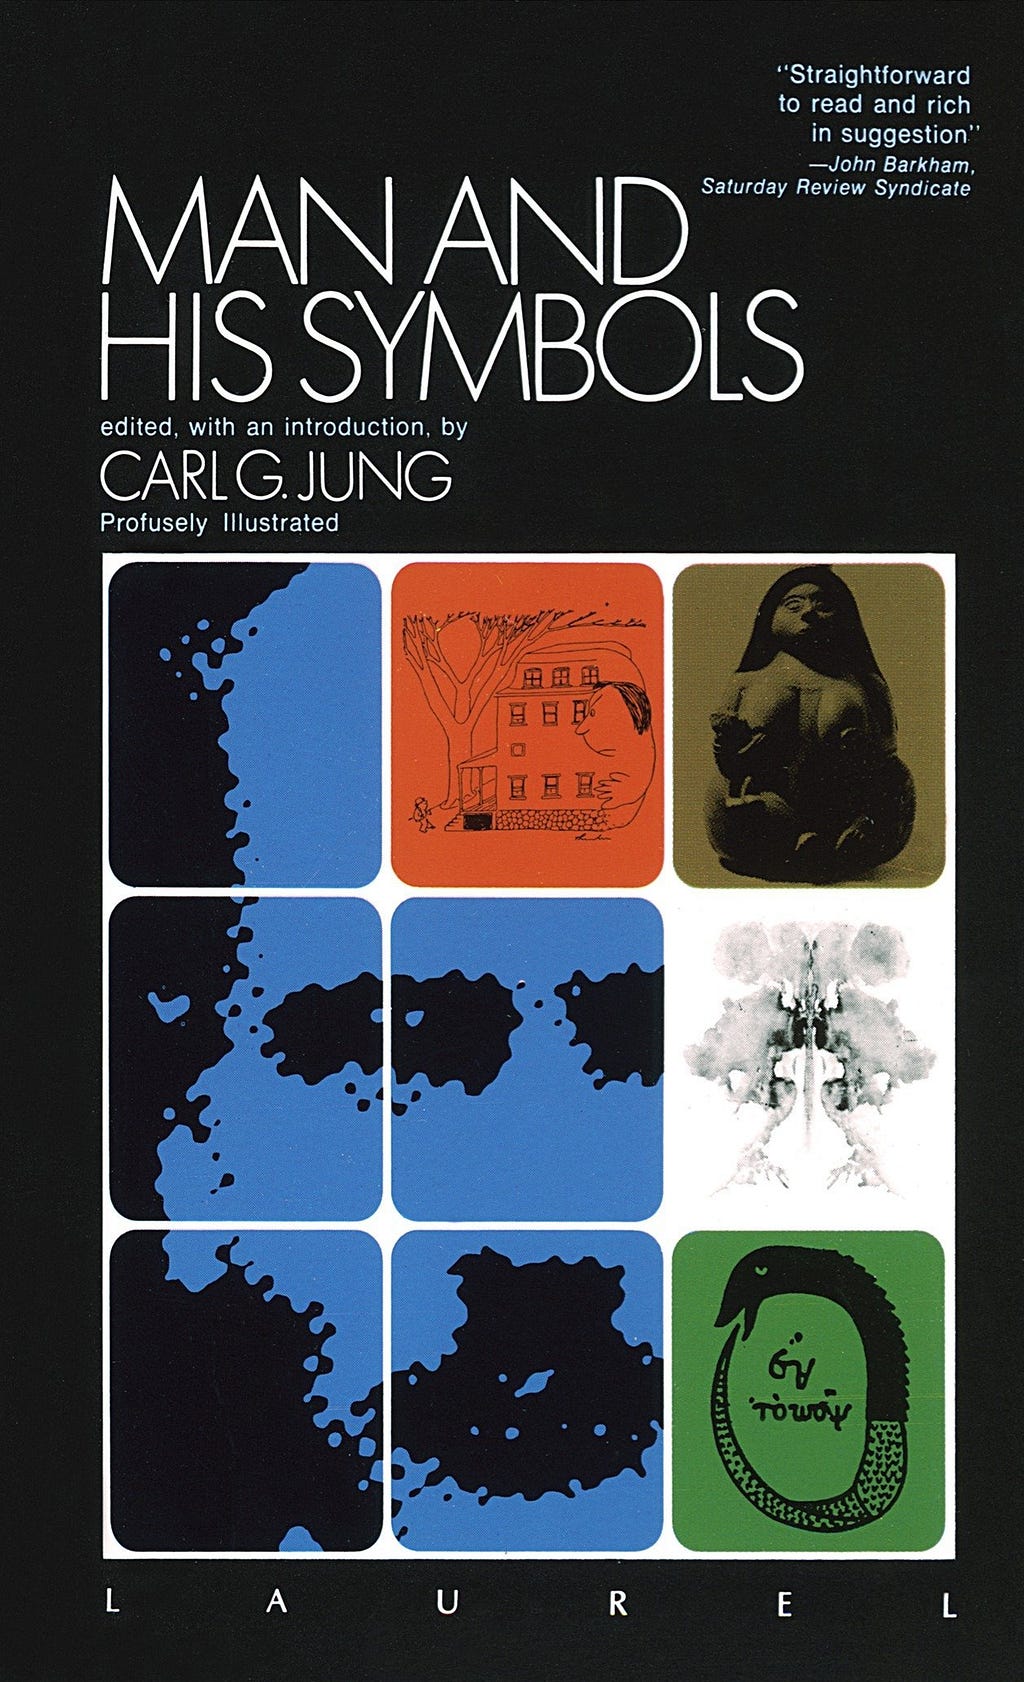 The cover of Carl Jung’s anthology Man and His Symbols